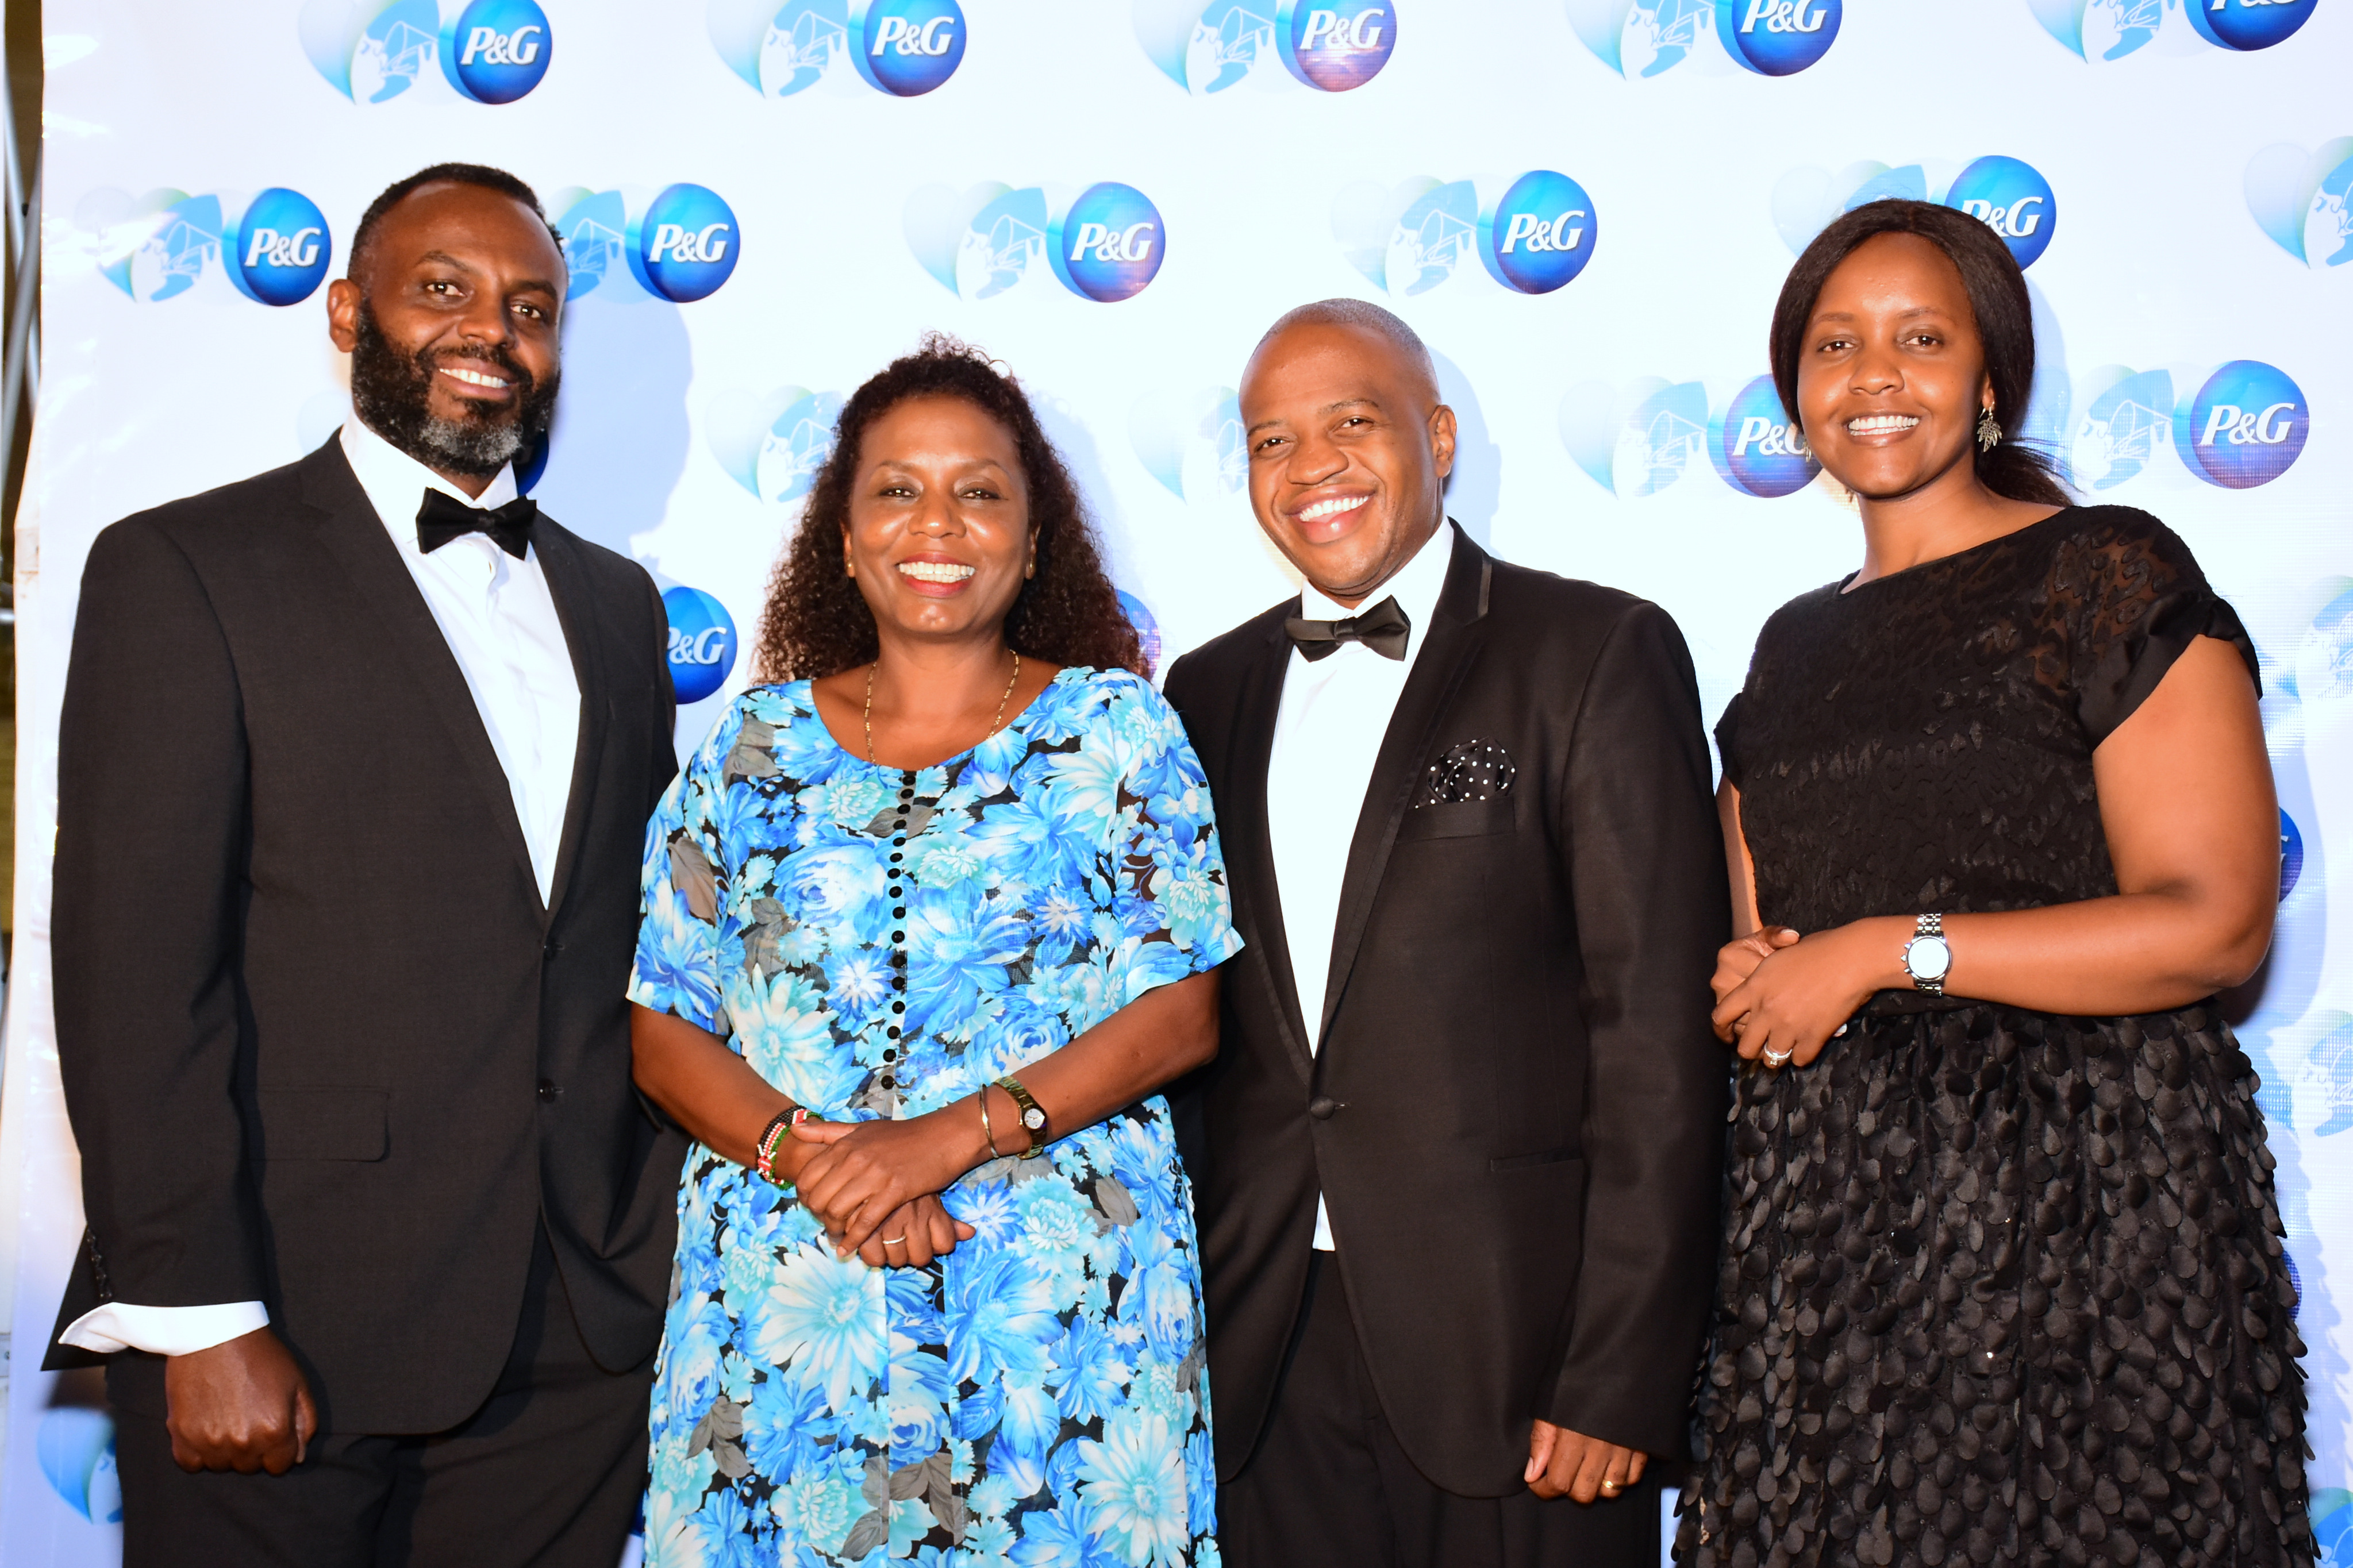 Anthony Ng’ang’a, commercial director for P&G East Africa, Jennifer Shamalla (Nominated Member of Parliament), George Owuor, P&G's legal counsel & government relations lead for East Africa and Ivy Kimani, Always brand manager during CSDW documentary screening at The National Museum of Kenya